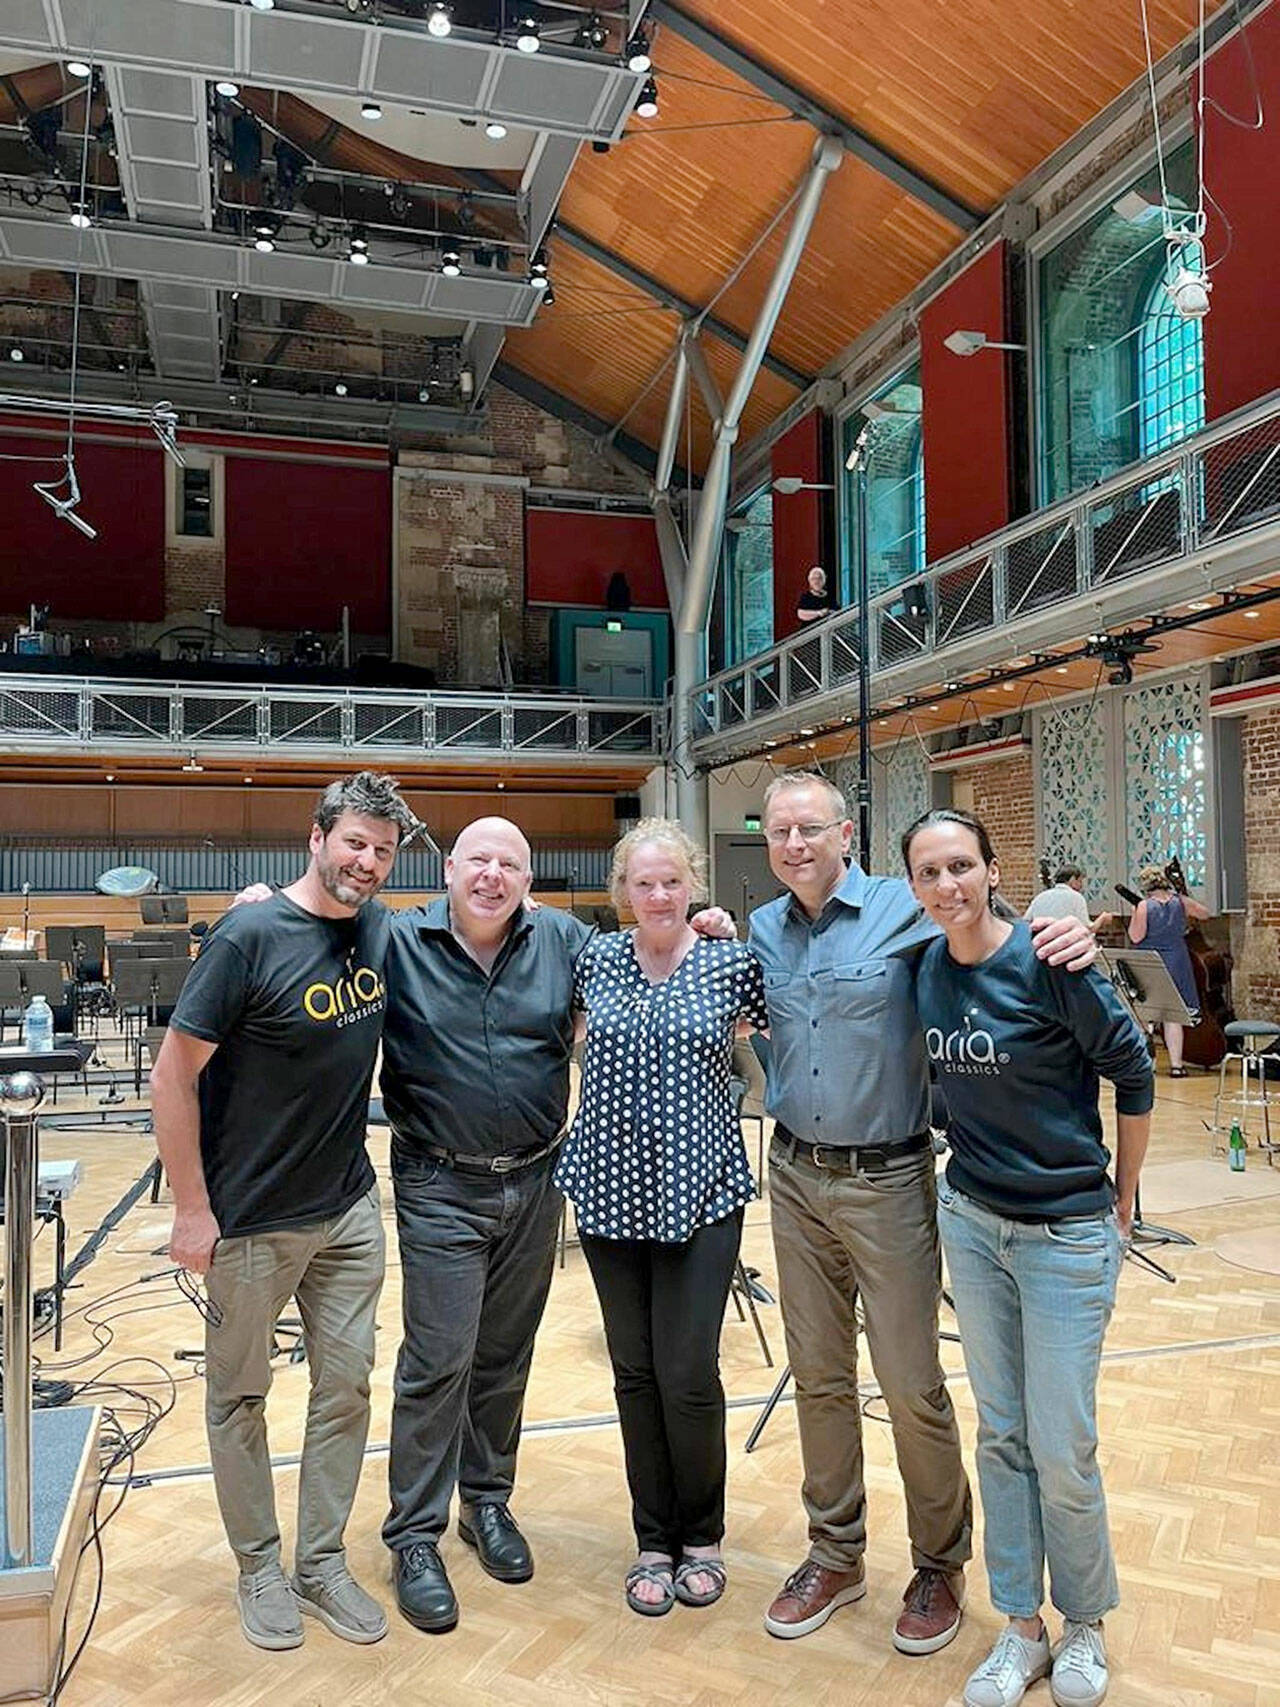 At the London Symphony Orchestra’s home venue in England, an international team of musicians recorded the Port Angeles Symphony’s Concerto for Double Bass and Orchestra: from left, producer Fernando Aria of Spain; Port Angeles Symphony conductor Jonathan Pasternack; composer Sarah L. Bassingthwaighte; double bassist Steve Schermer and the producer’s partner, Ines Aria. (Port Angeles Symphony)